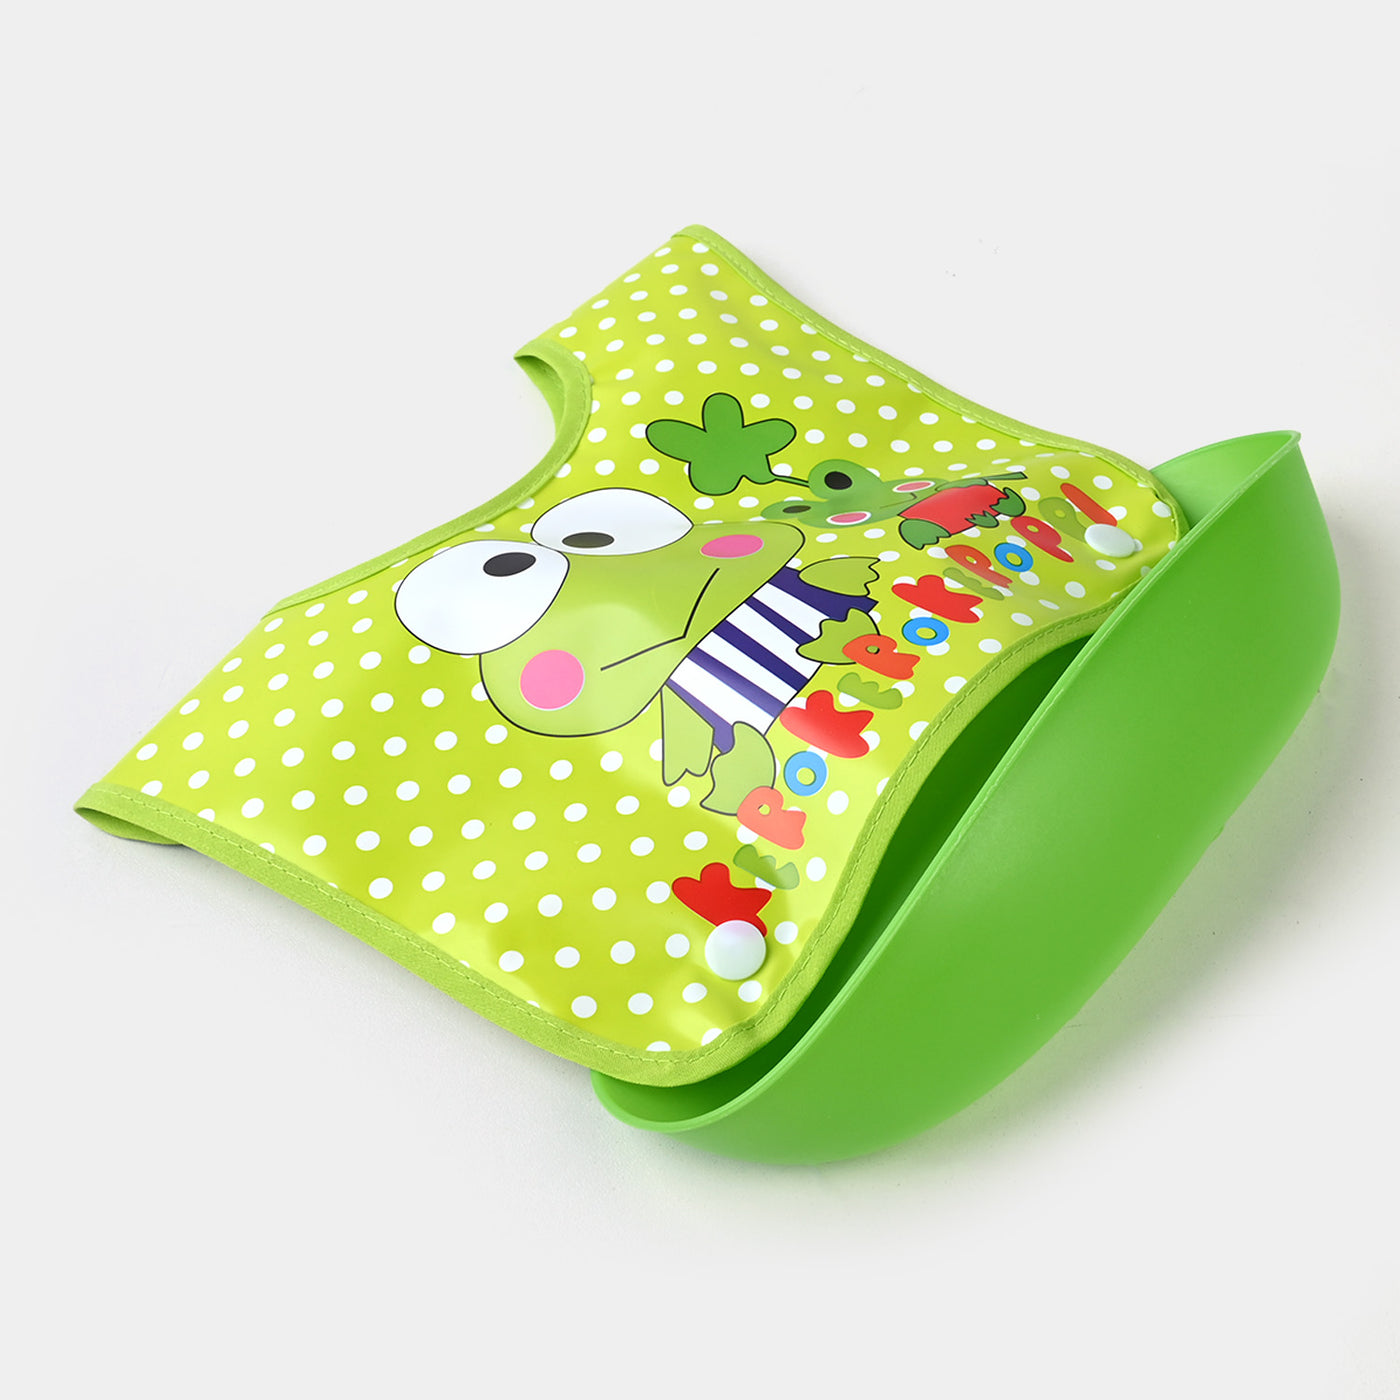 PLASTIC BIB WITH HOLDER FOR BABIES